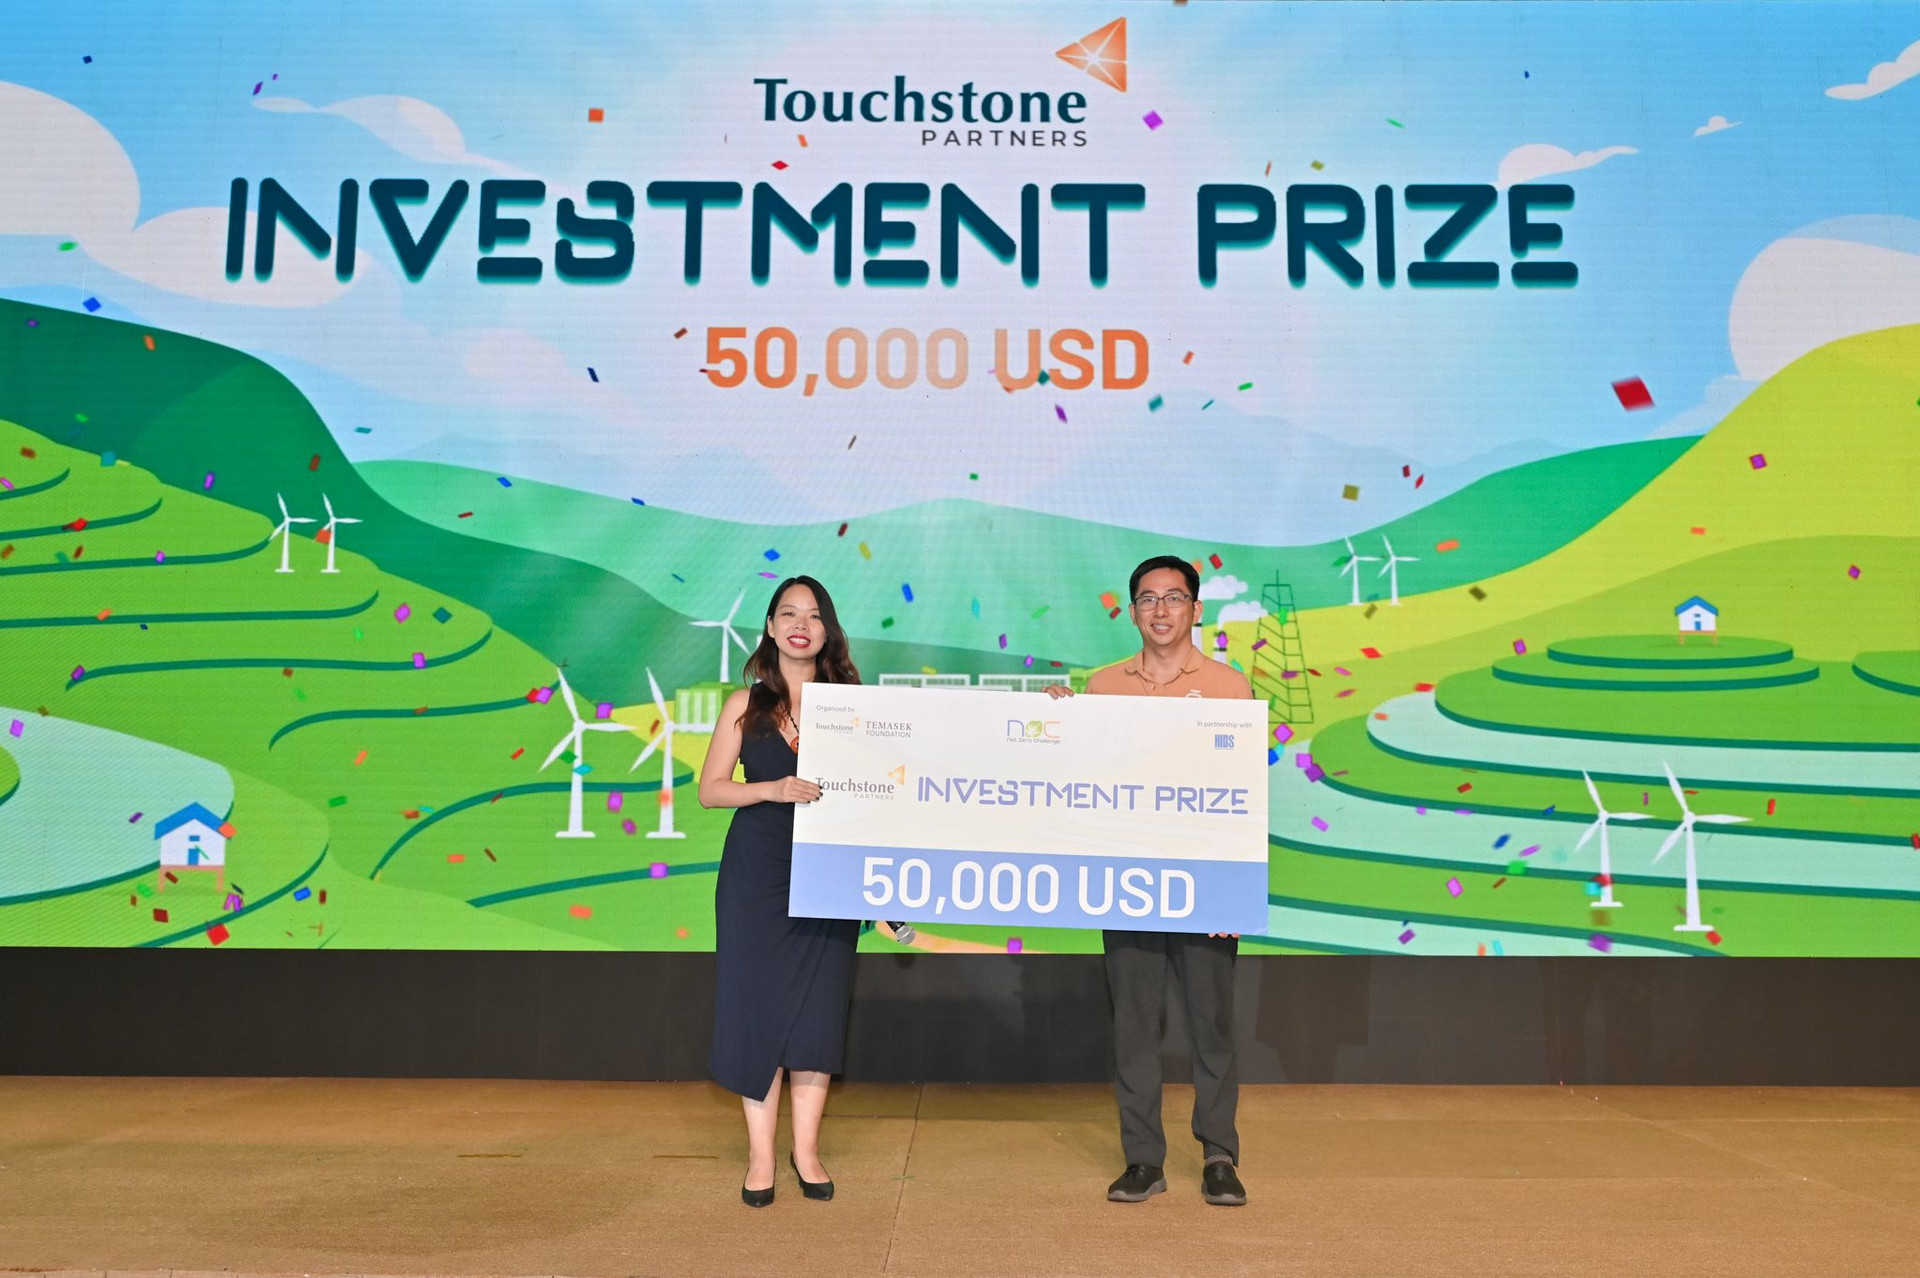 2.-touchstone-partners-investment-prize.jpg